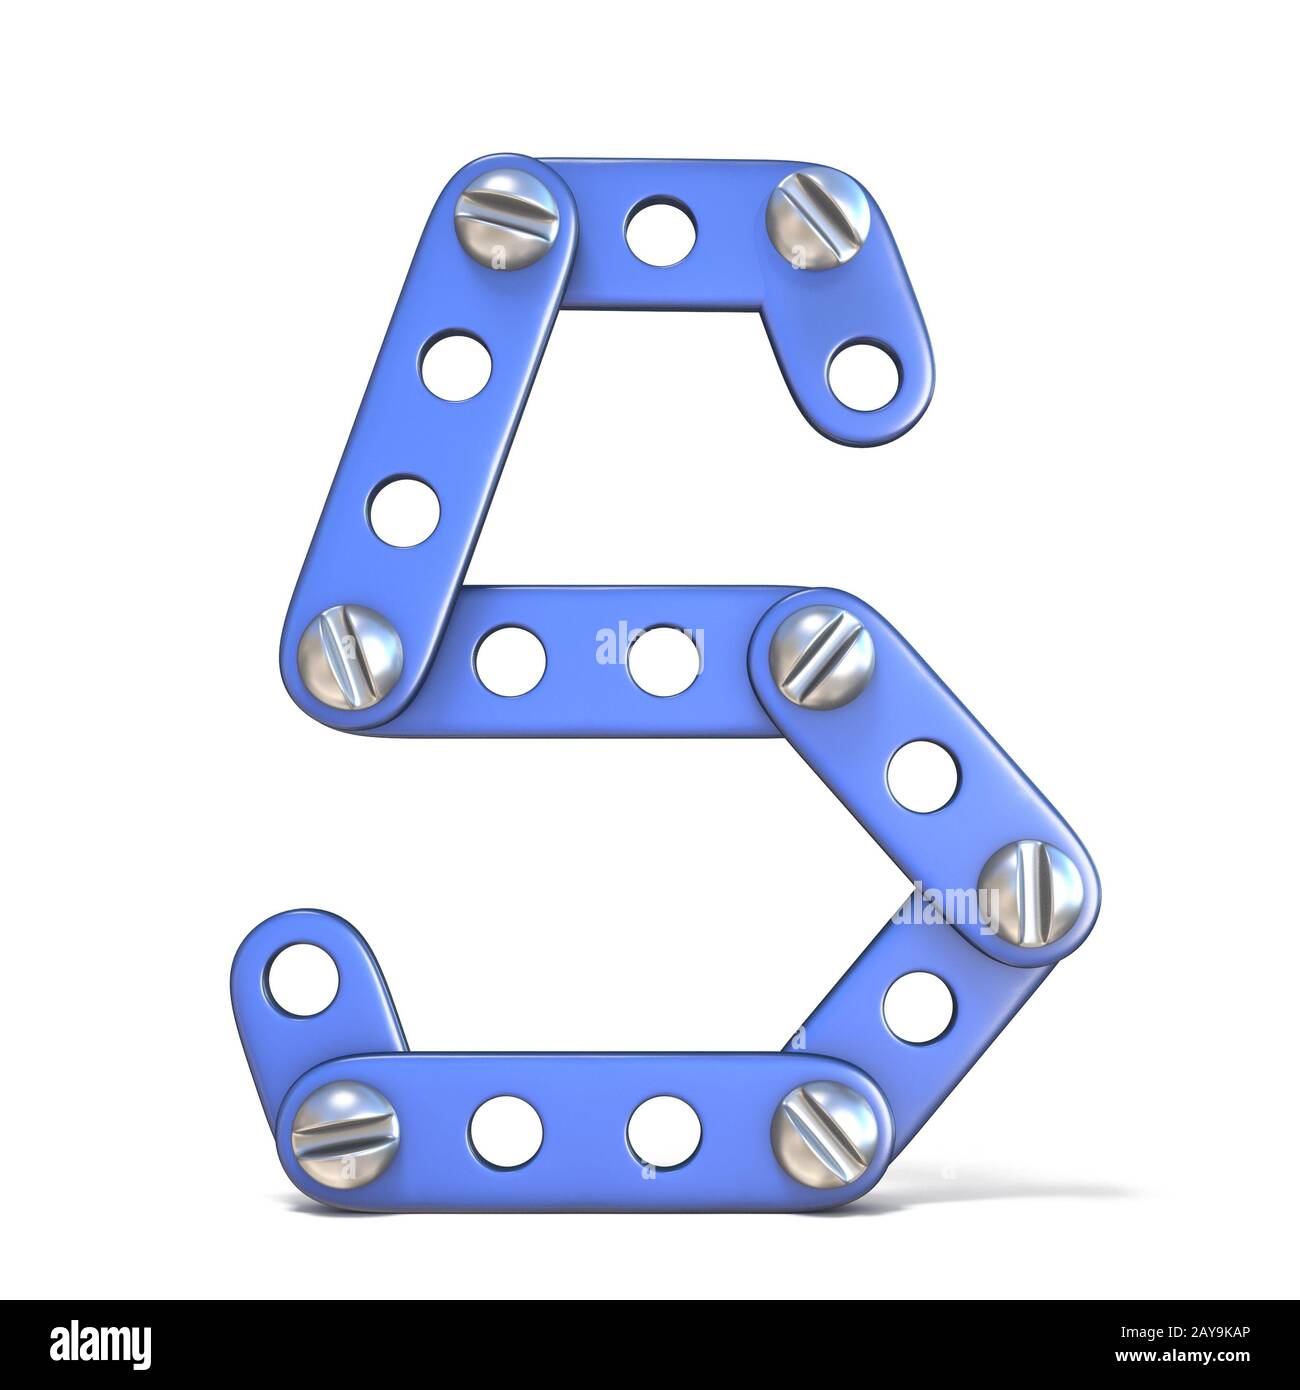 Alphabet made of blue metal constructor toy Letter S 3D Stock Photo